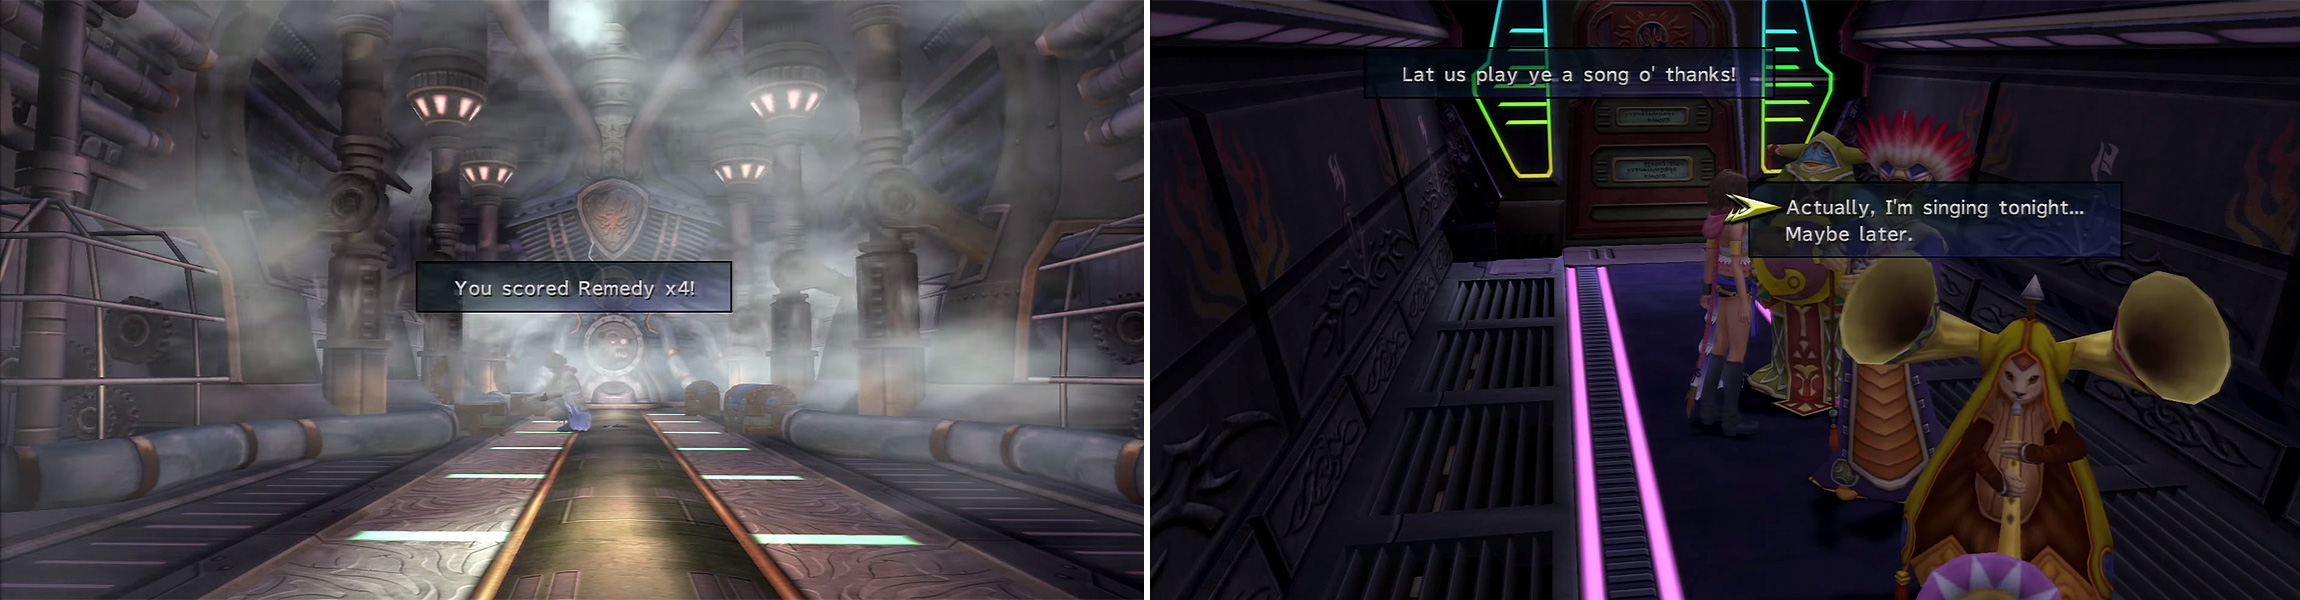 The chests in the Engine Room have replenished (left). You need to ask the musicians to accompany you and then push them in the elevator (right).